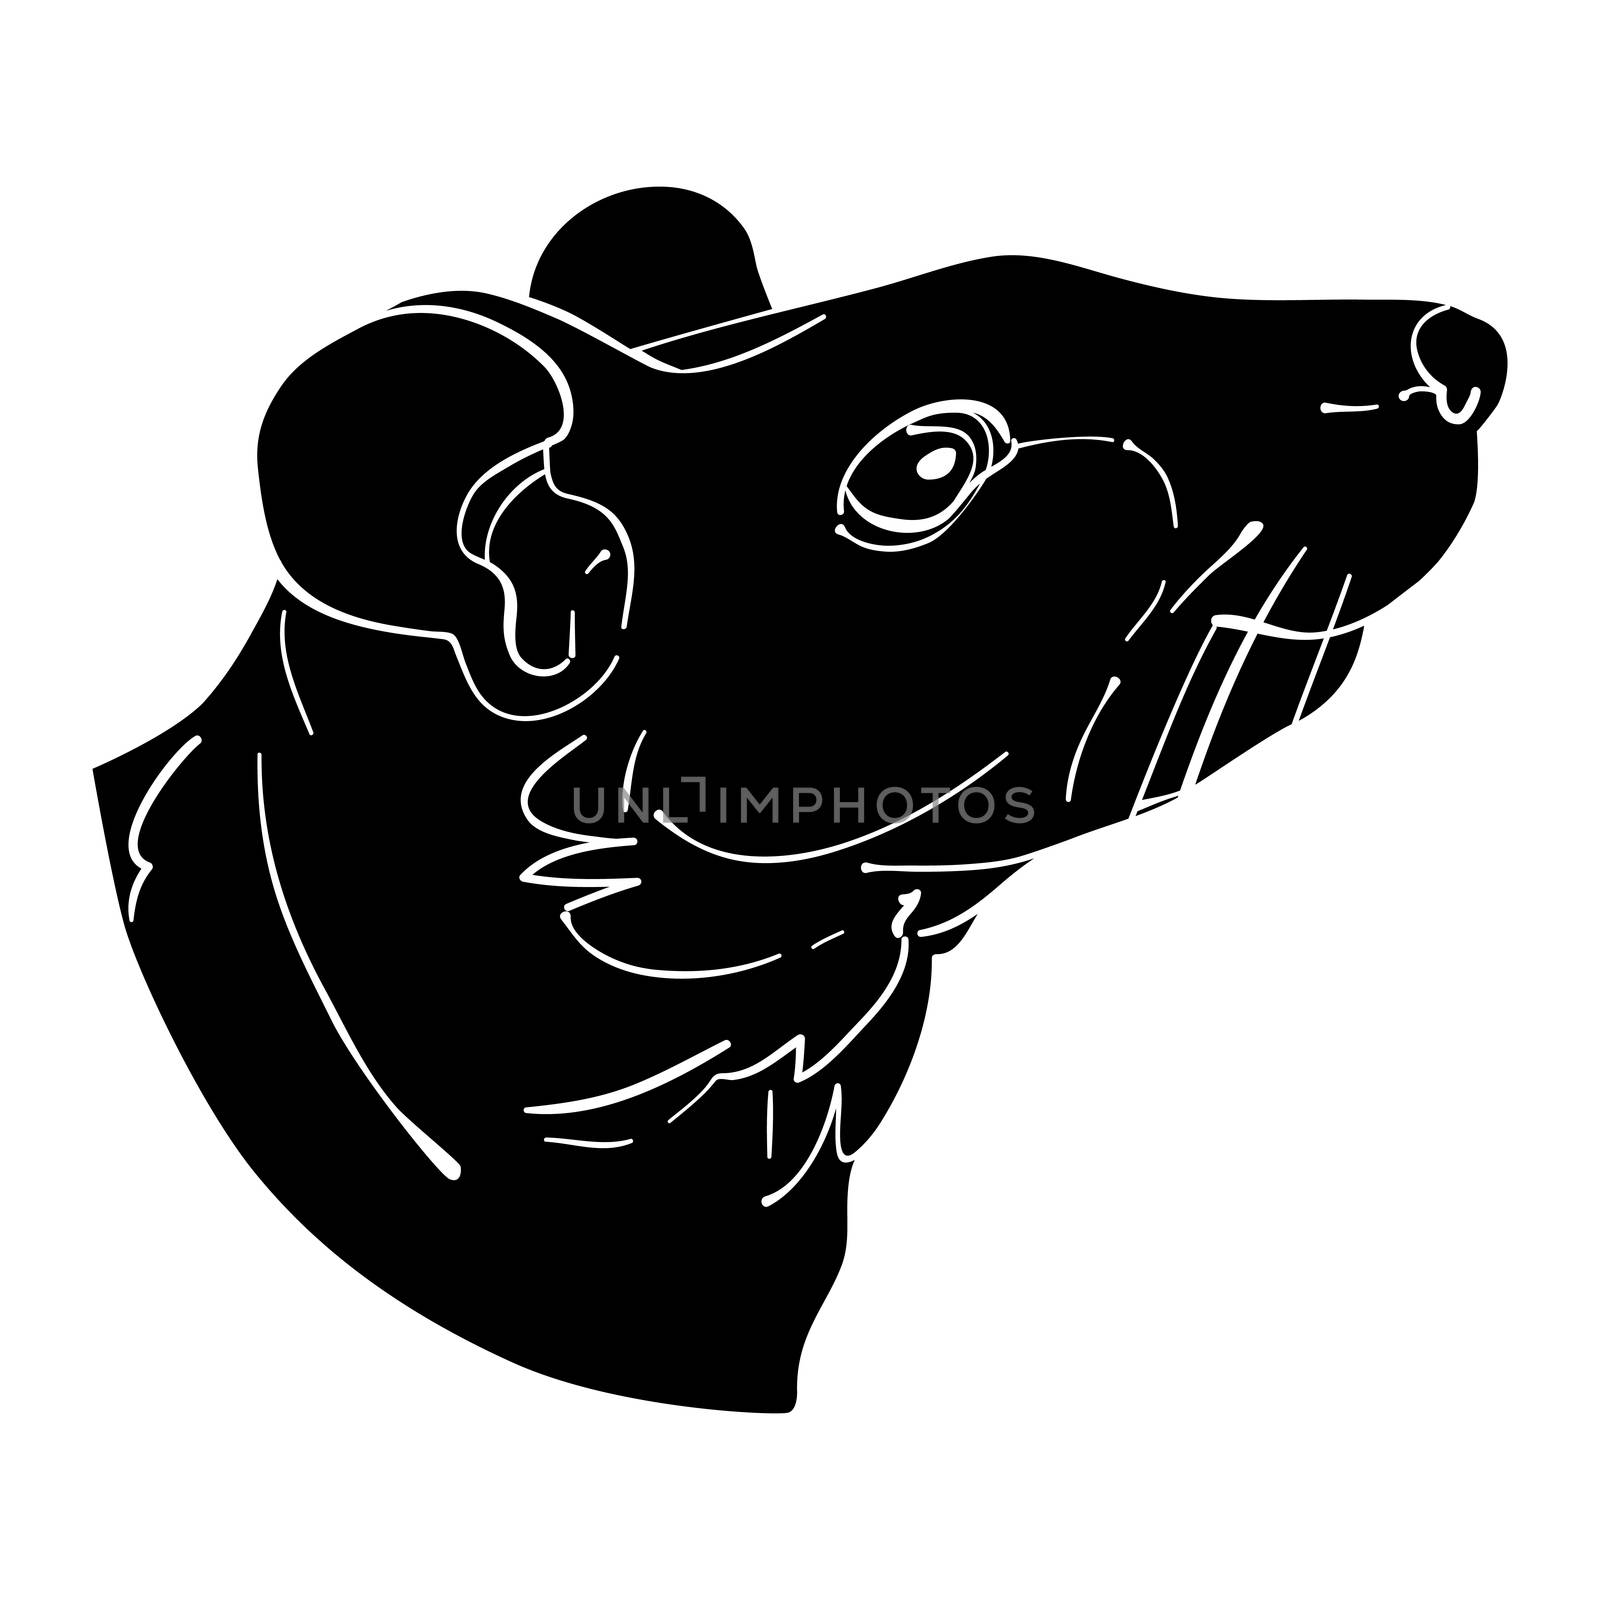 Rat head avatar, Chinese zodiac sign, black silhouette isolated on white